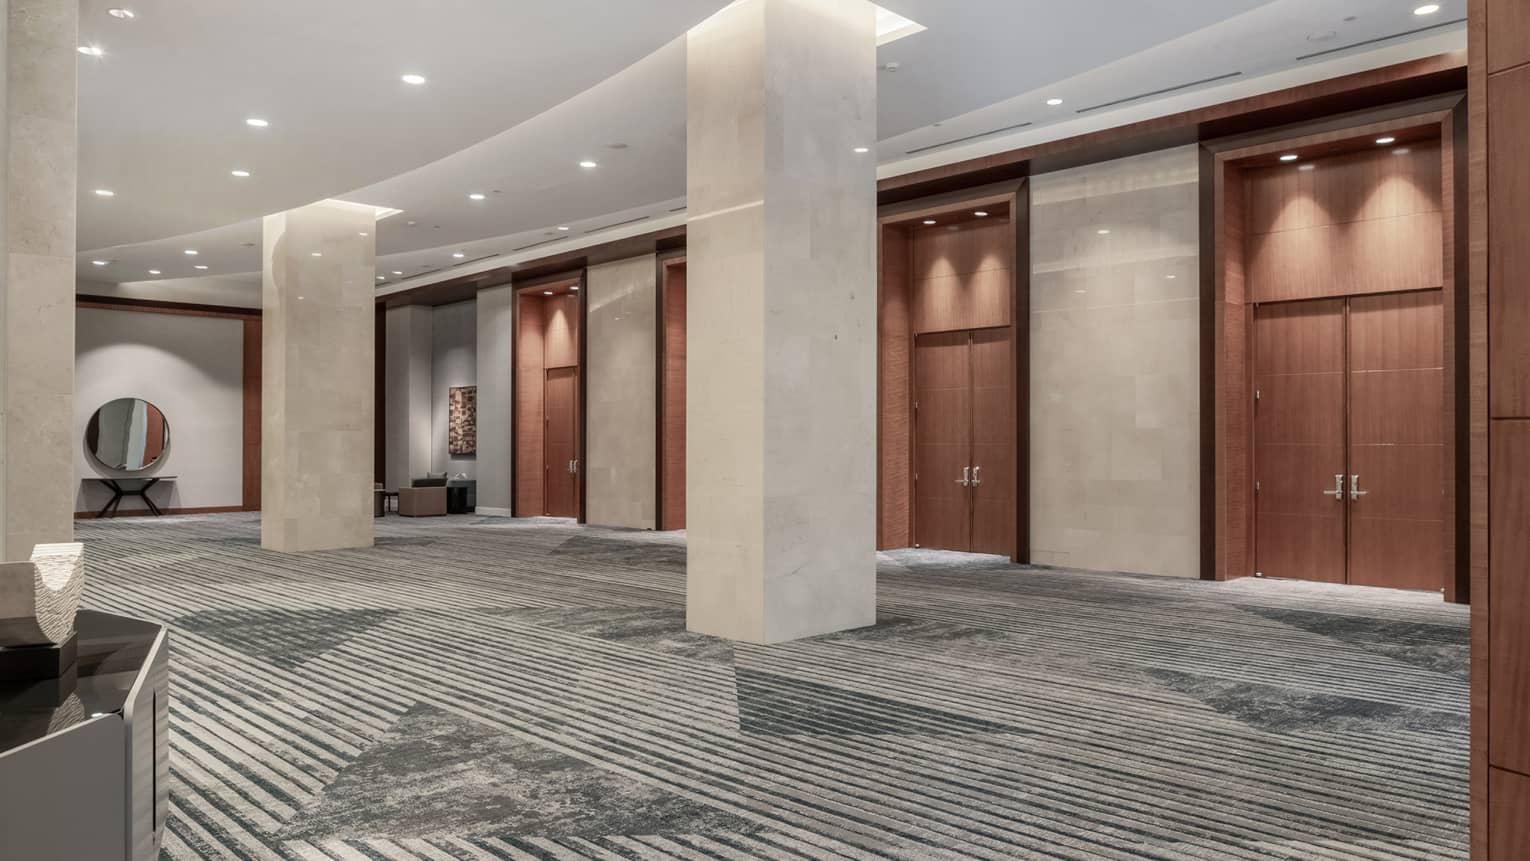 A large lobby meeting area with a series of large wooden doors and pillars.